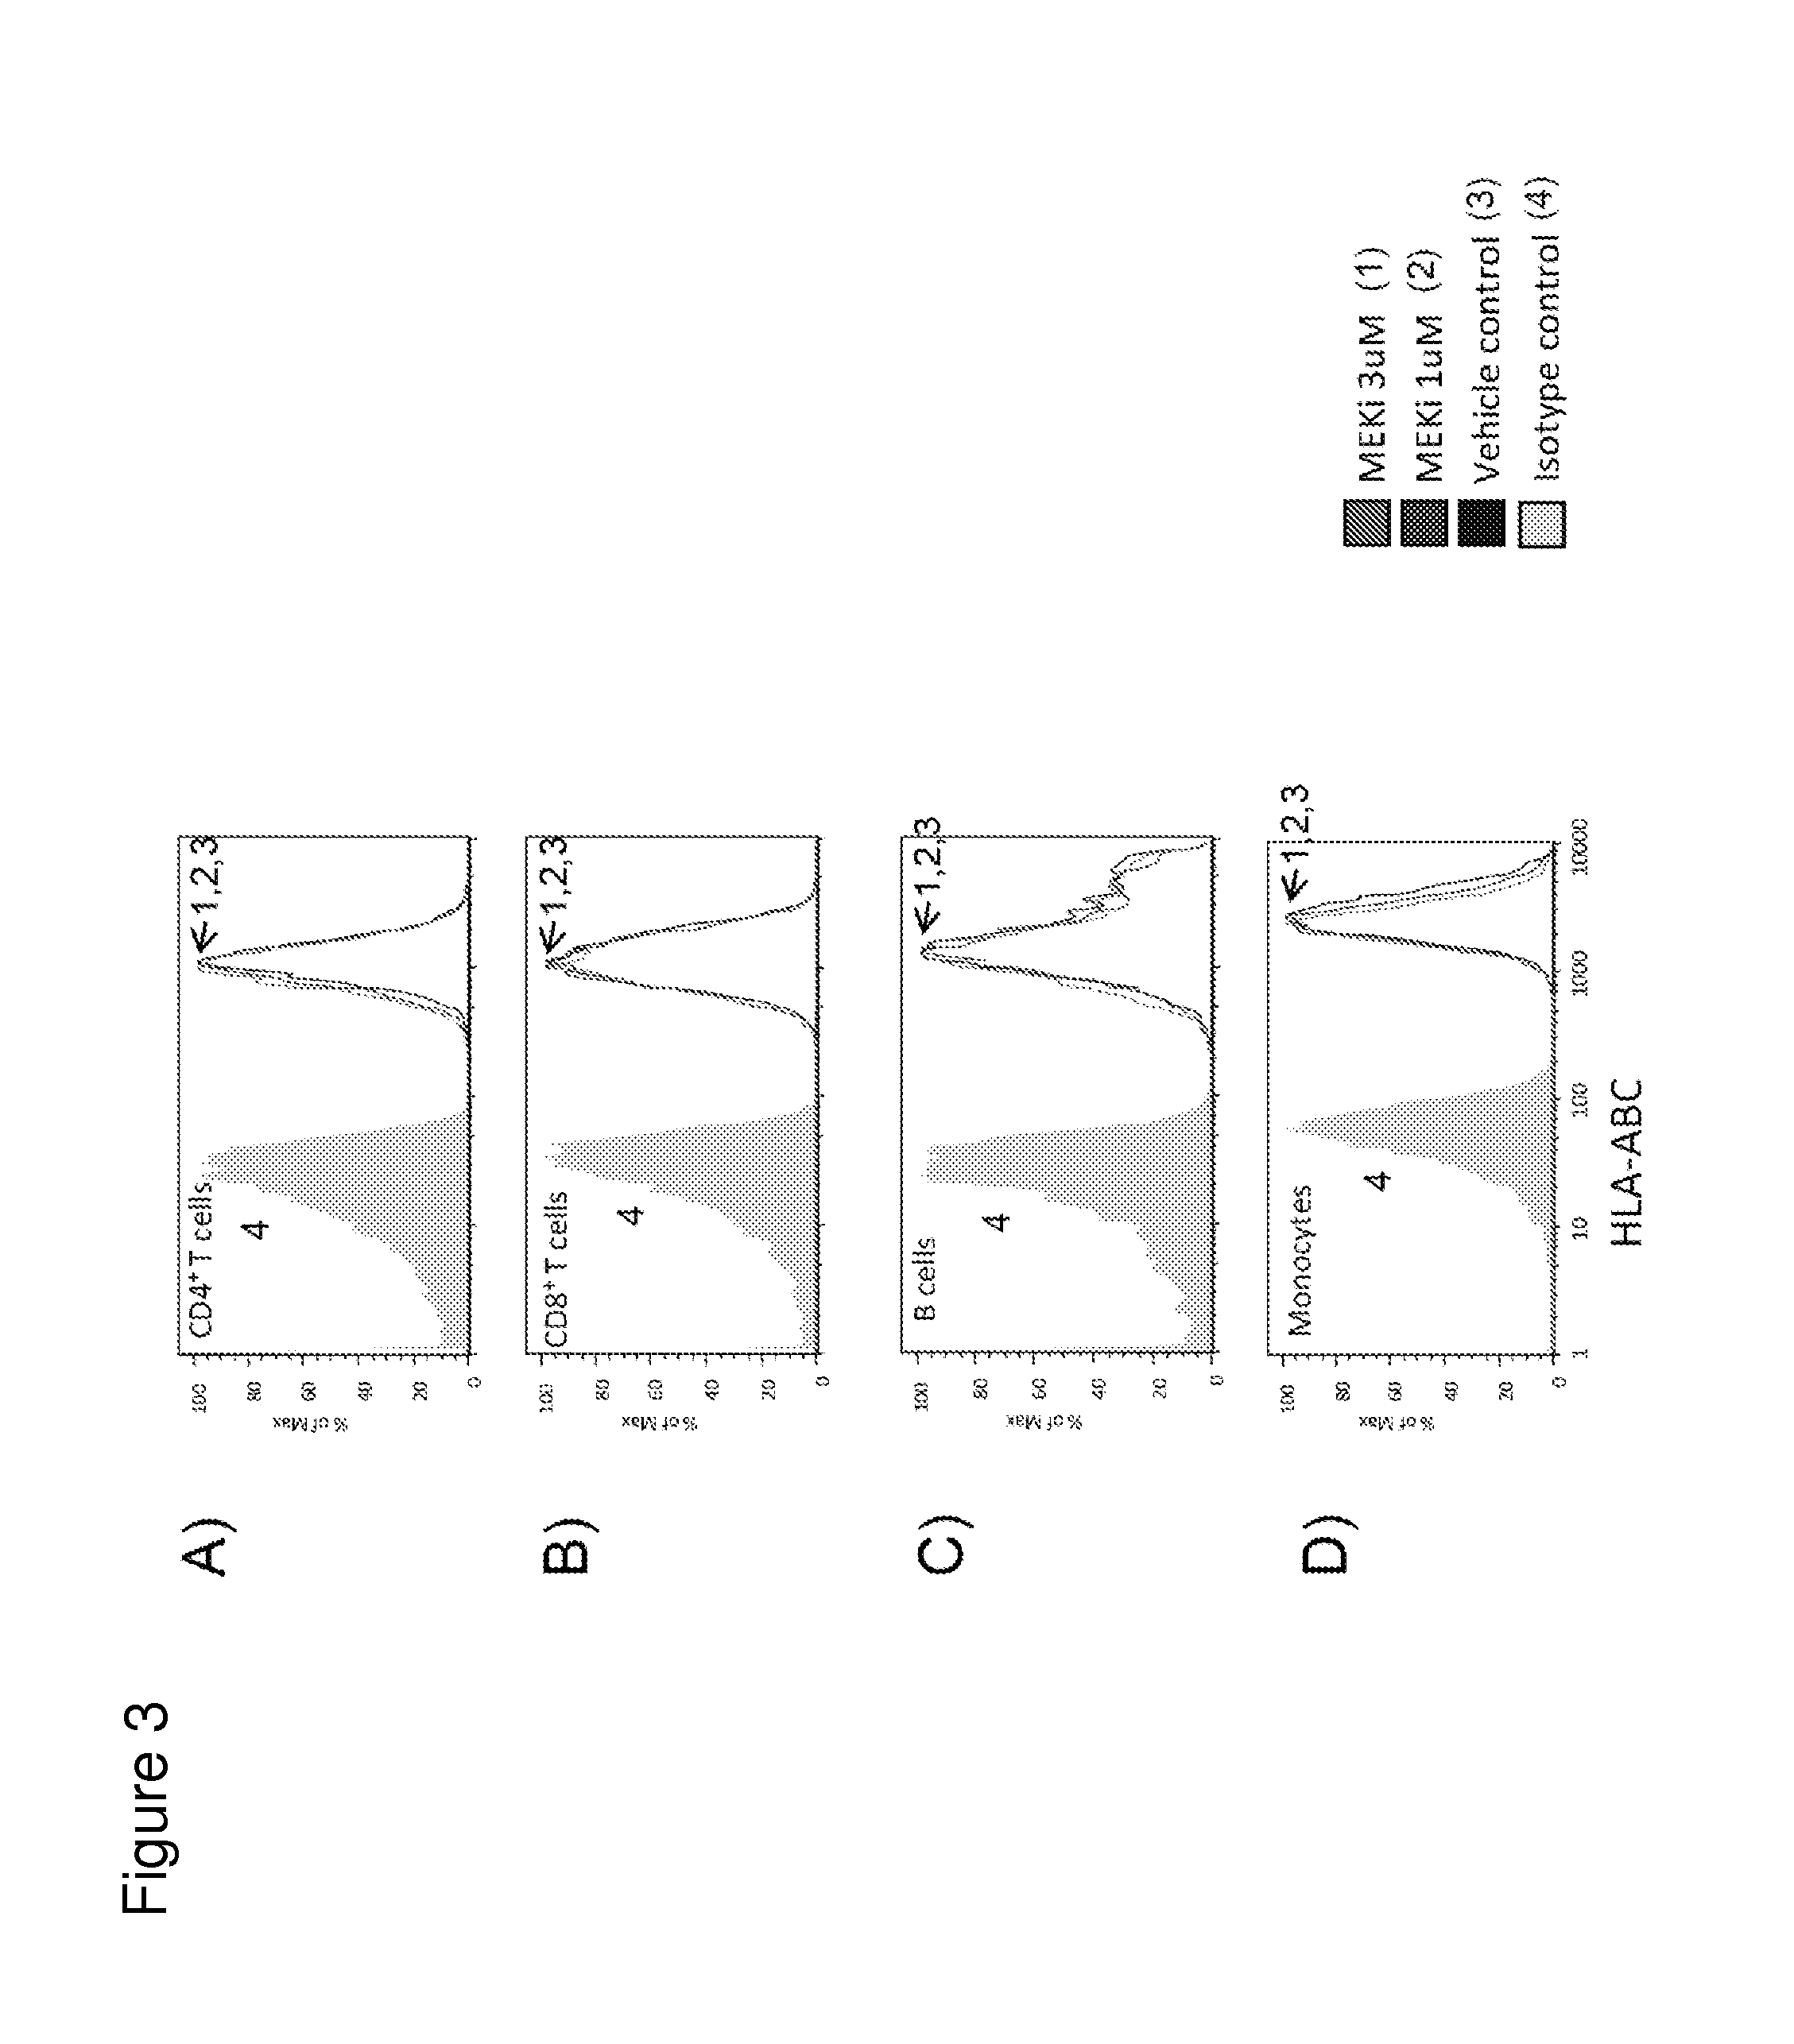 Methods of treating cancer using pd-1 axis binding antagonists and mek inhibitors